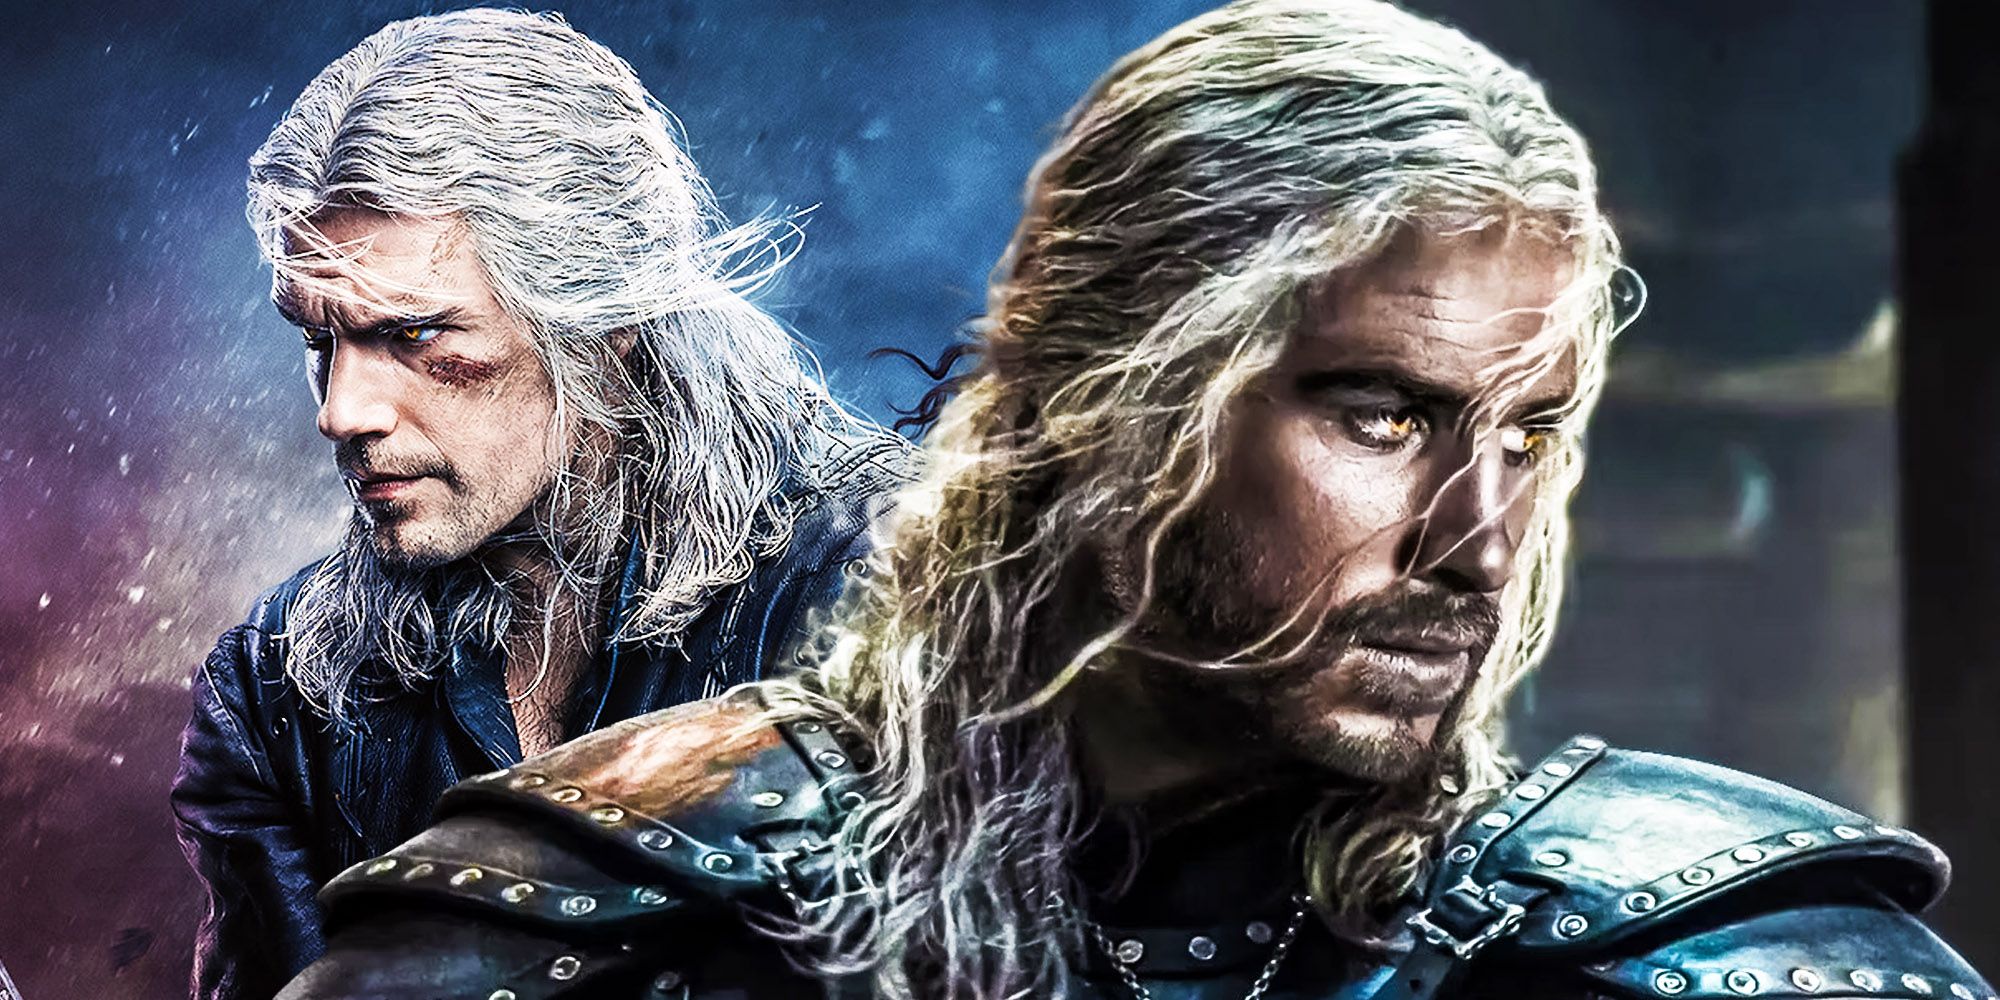 Liam Hemsworth to Replace Henry Cavill in 'The Witcher